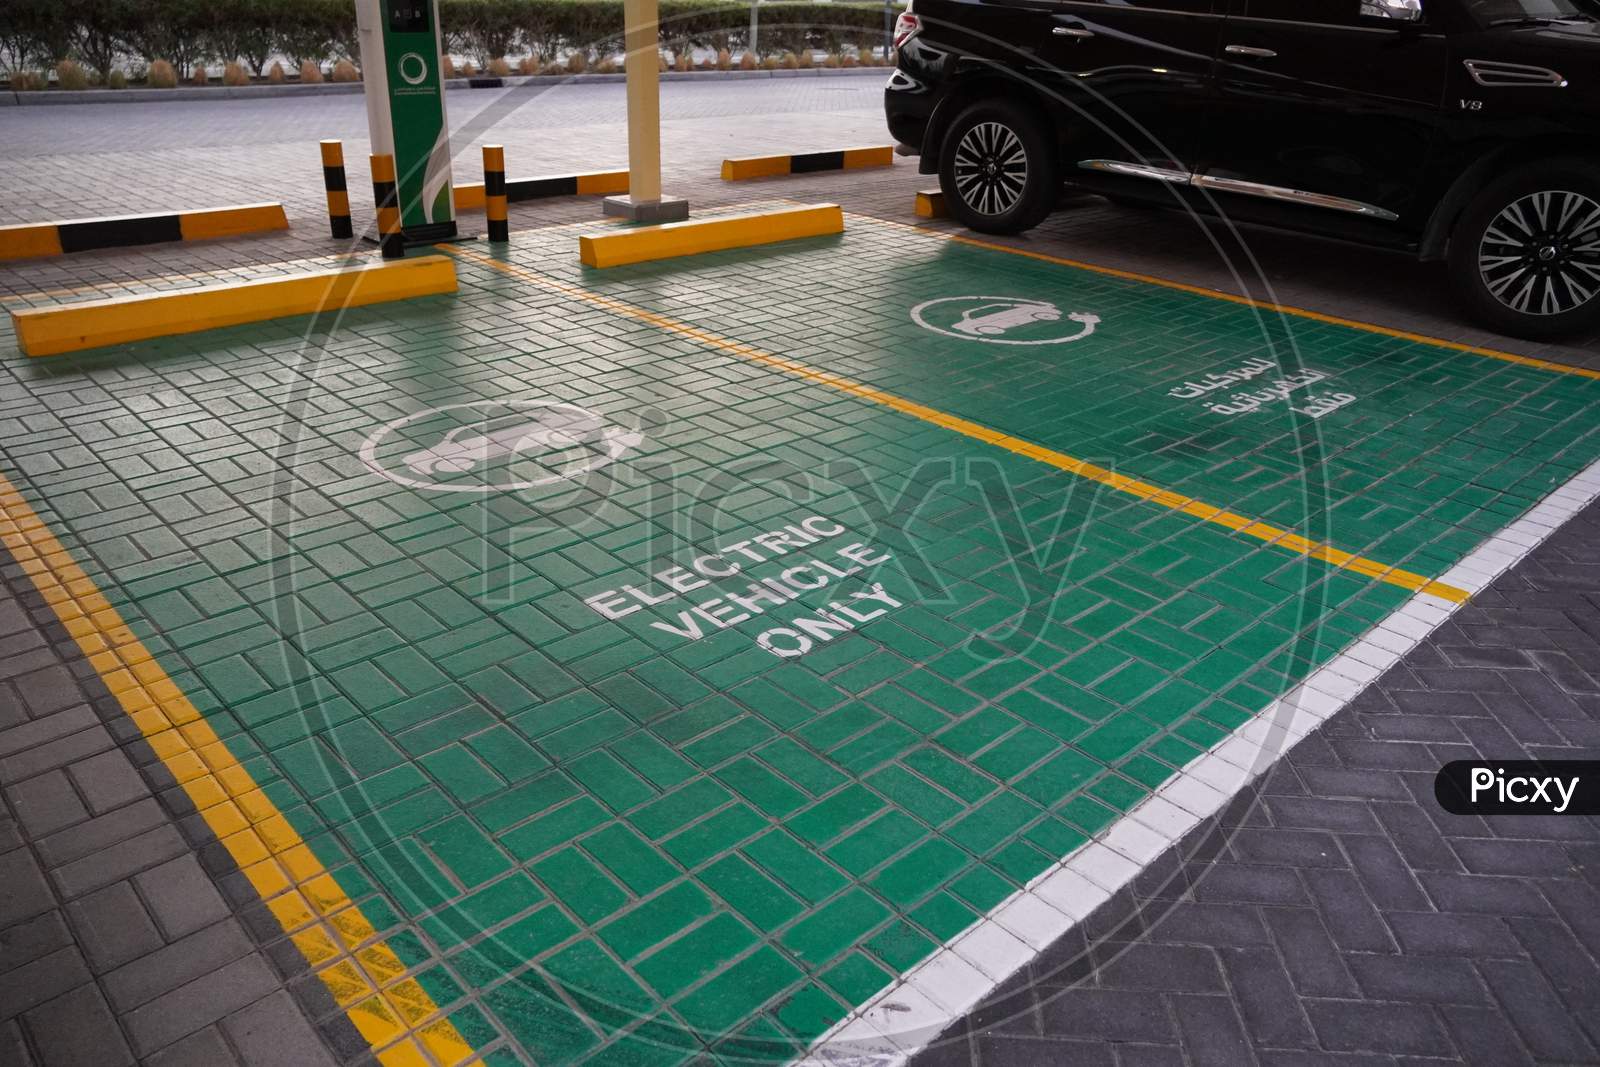 Green Electric Vehicle Charging Station Sign In A Parking Bay. Electric Vehicle Parking Space. Electric Car Charging Station. Dubai Uae December 2019